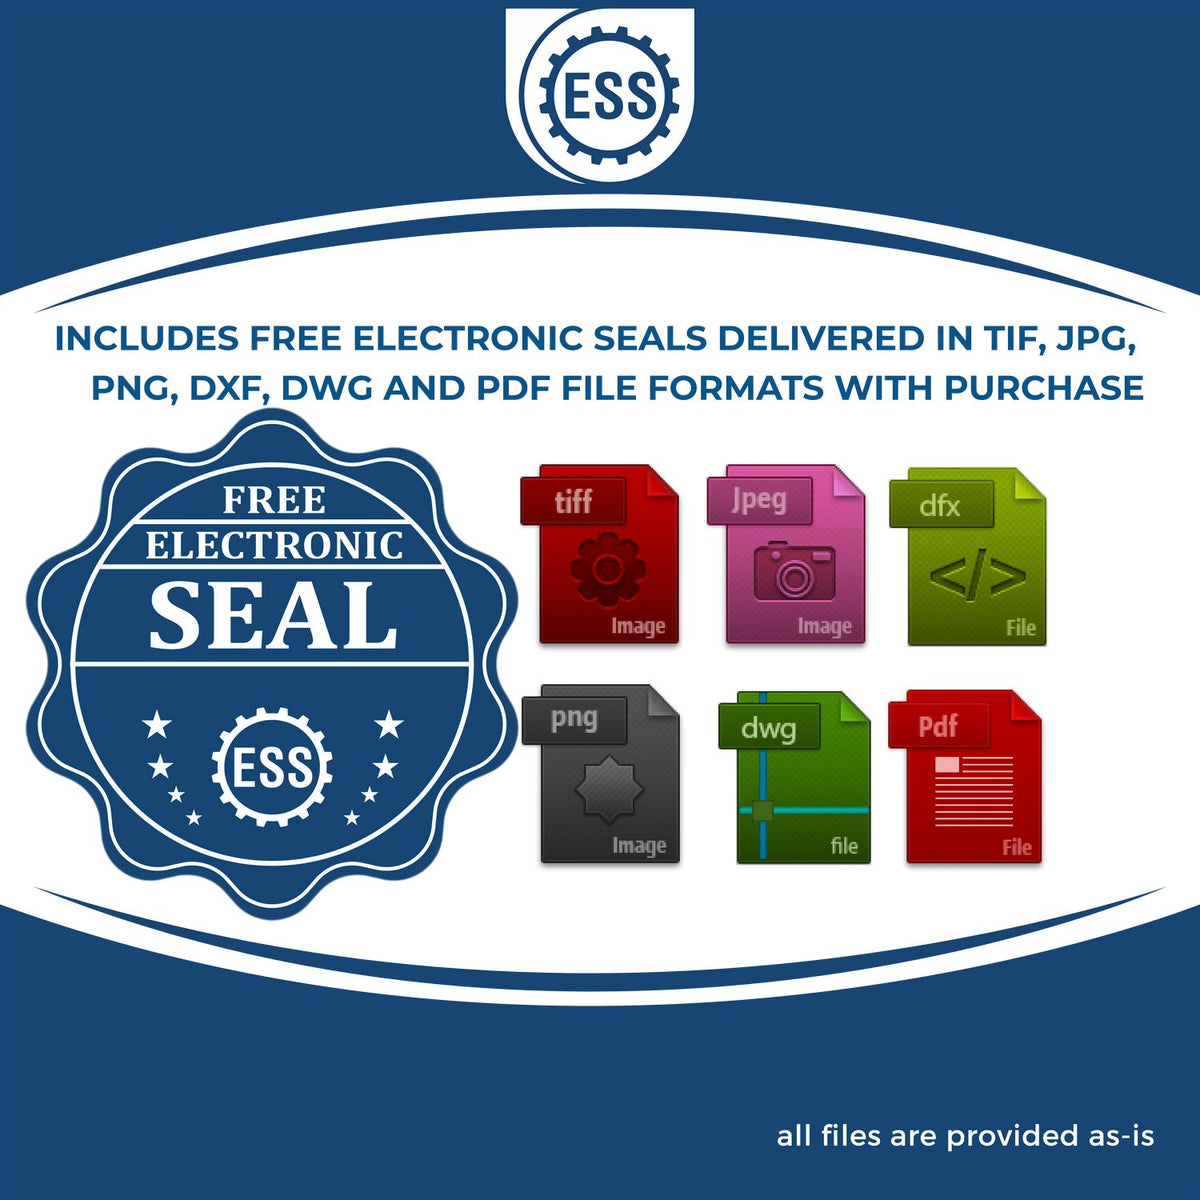 An infographic for the free electronic seal for the Soft North Dakota Professional Geologist Seal illustrating the different file type icons such as DXF, DWG, TIF, JPG and PNG.